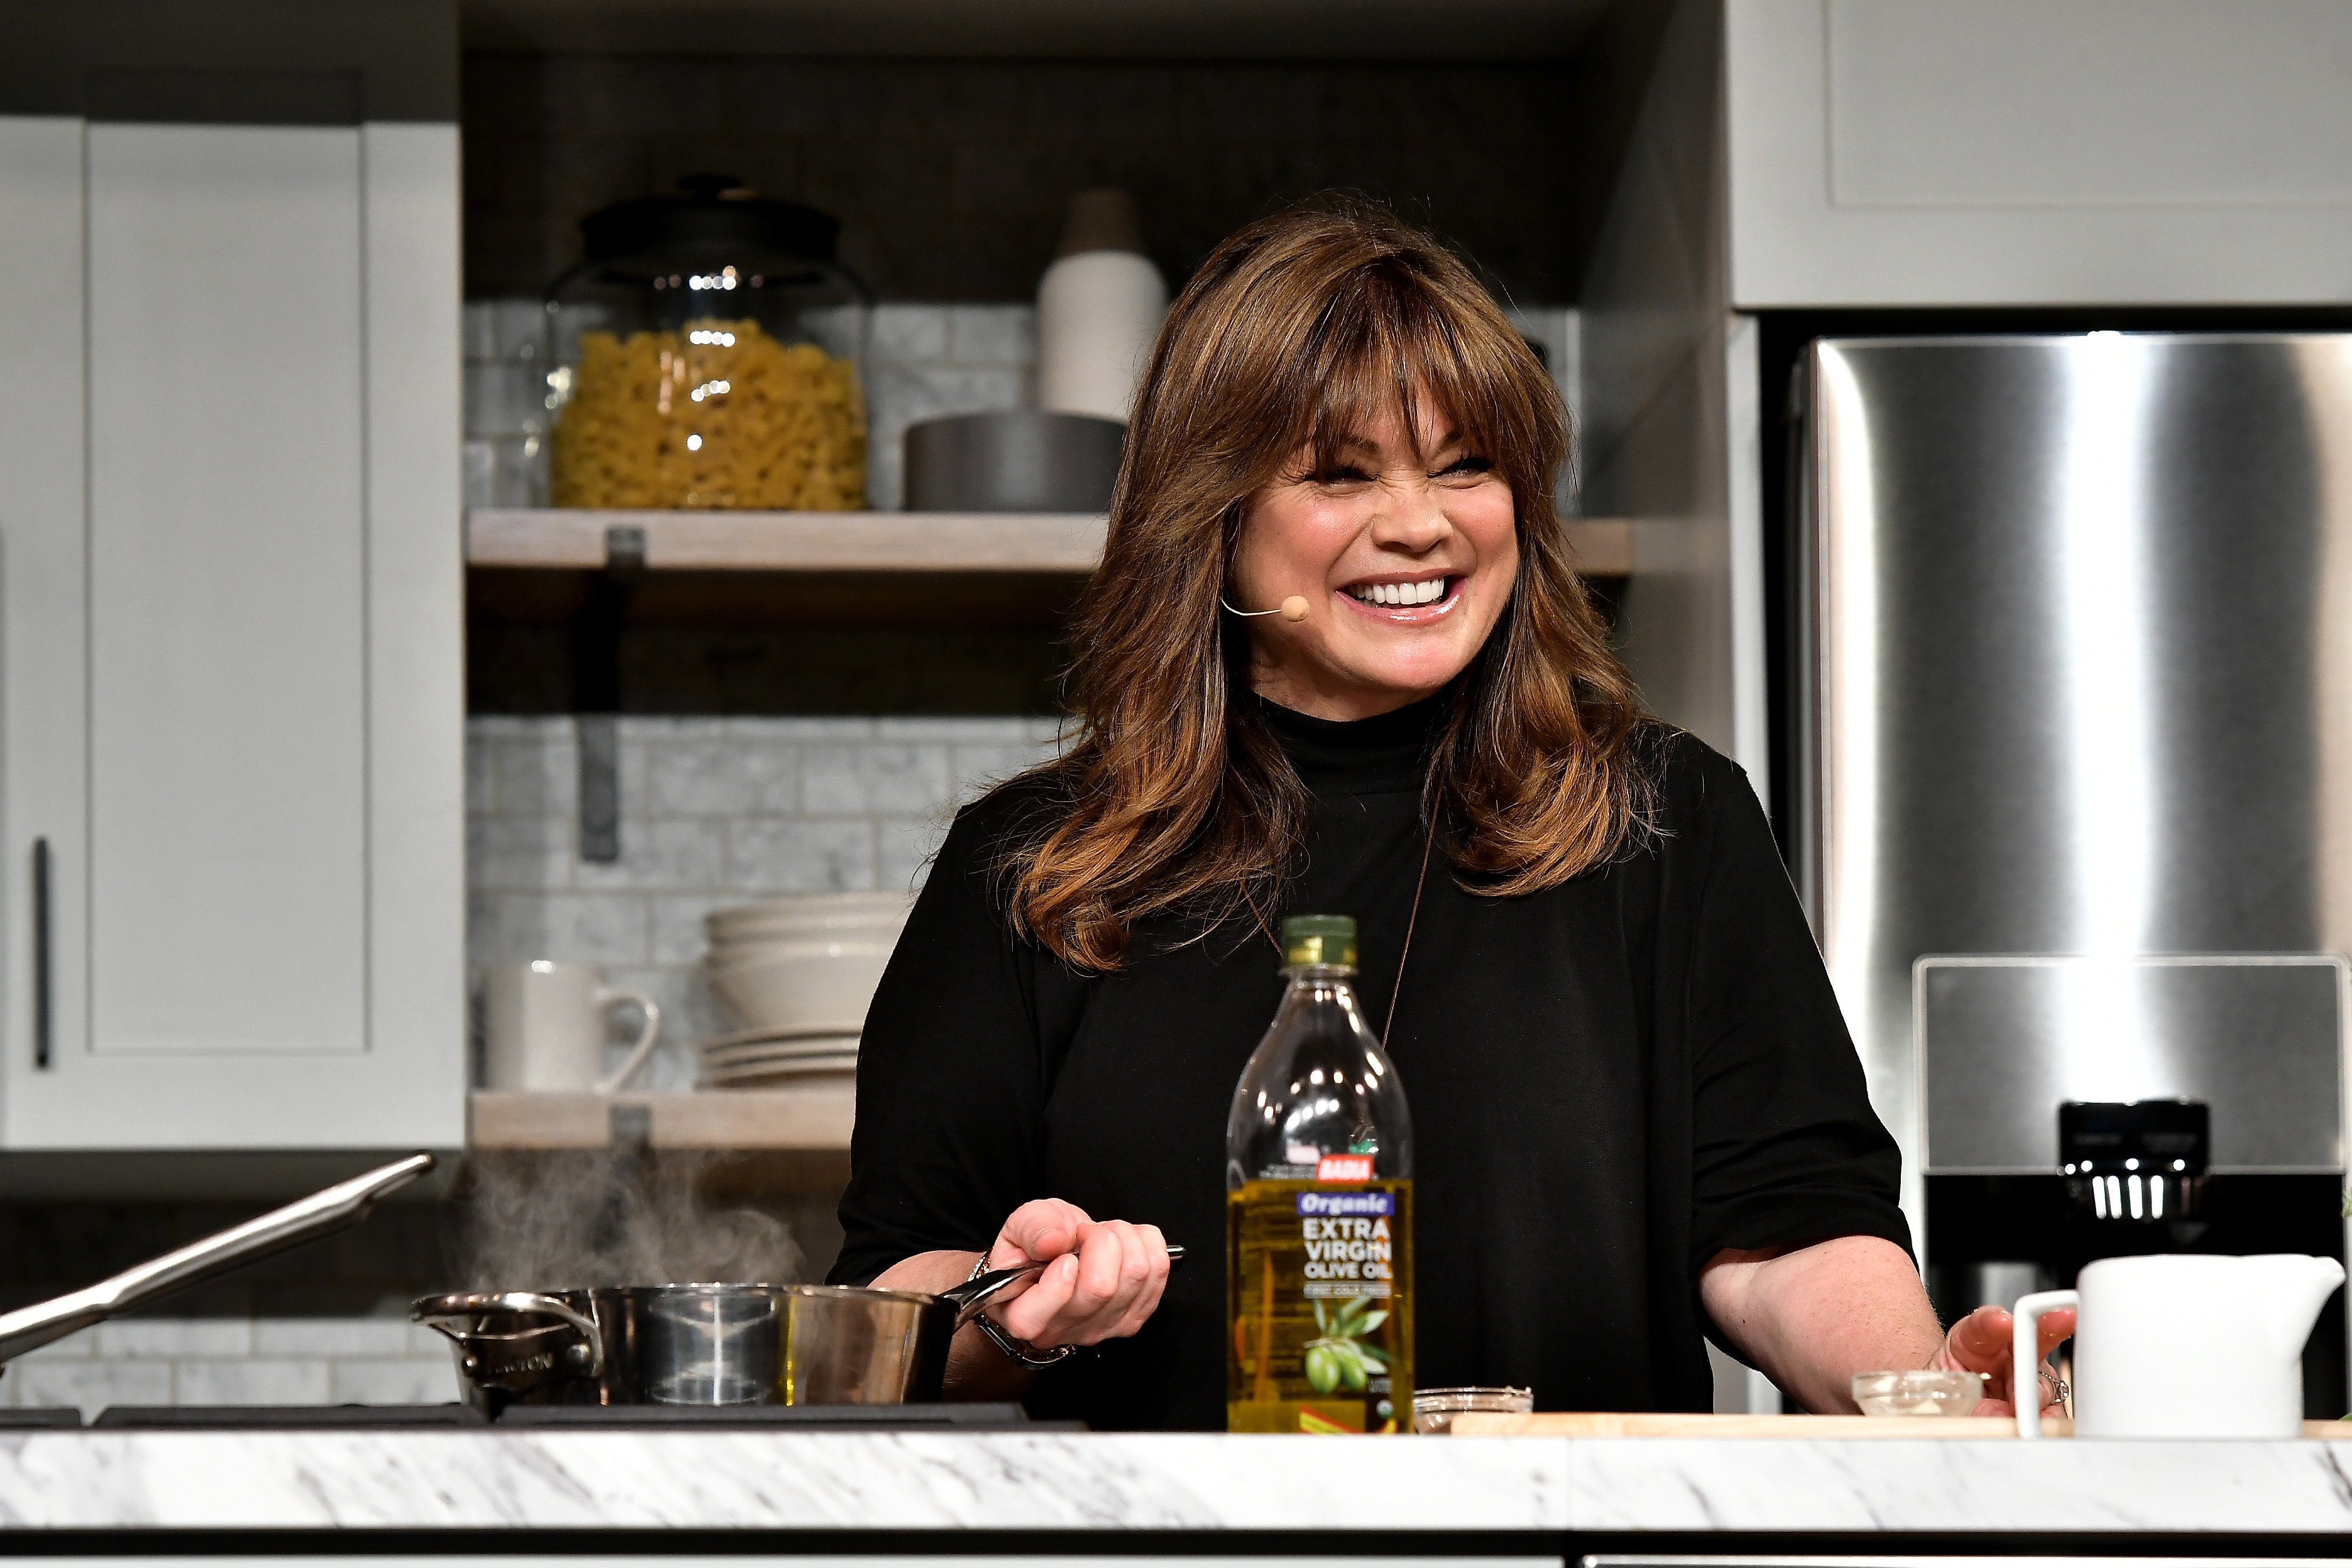 Food Network personality Valerie Bertinelli laughs during a recipe presentation in this photograph.